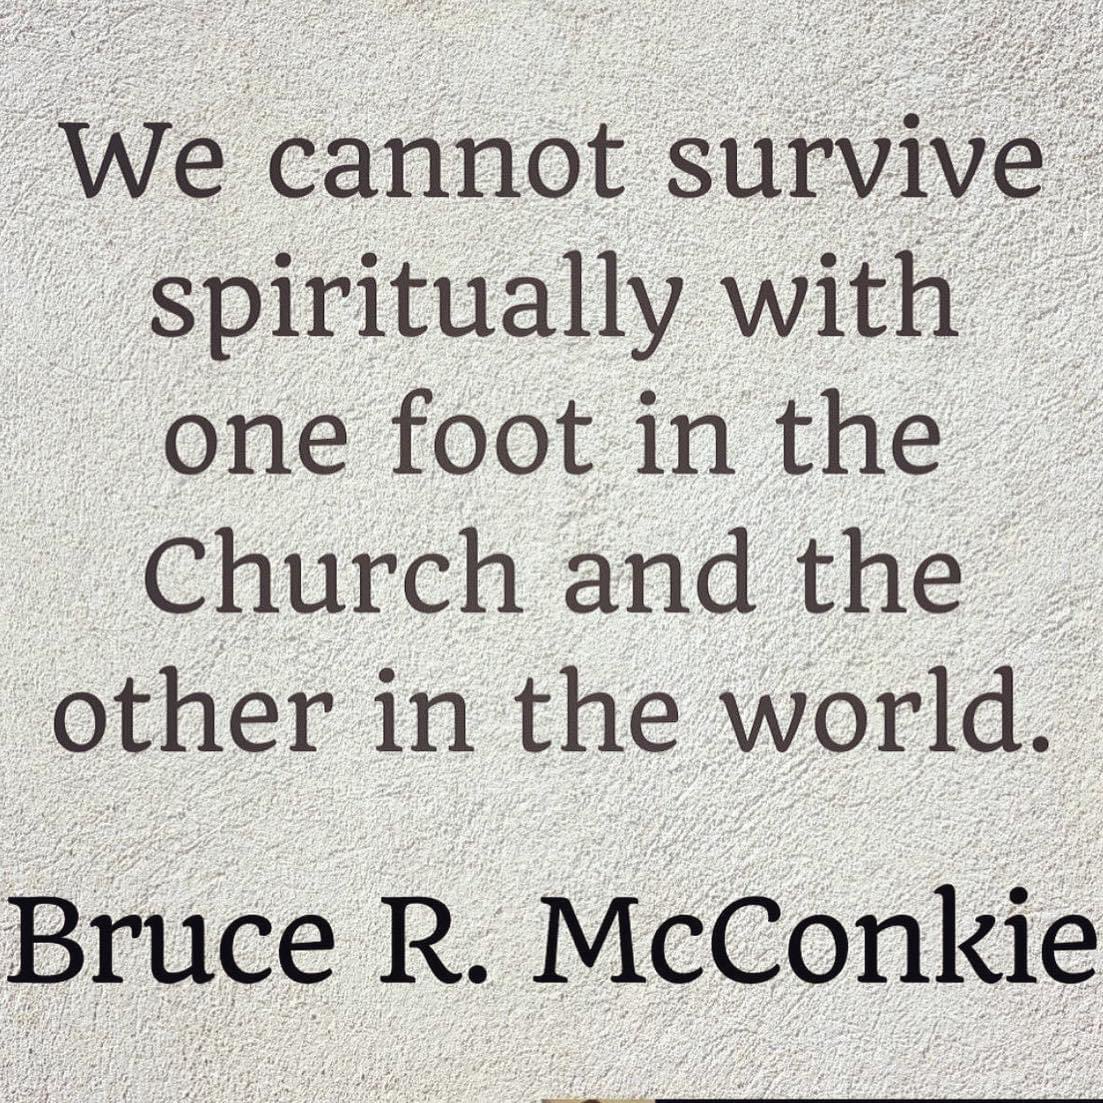 “We cannot survive spiritually with one foot in the Church and the other in the world.” ~ Elder Bruce R. McConkie 

#TrustGod #CountOnHim #WordOfGod #HearHim #ComeUntoChrist #ShareGoodness #ChildrenOfGod #GodLovesYou #TheChurchOfJesusChristOfLatterDaySaints